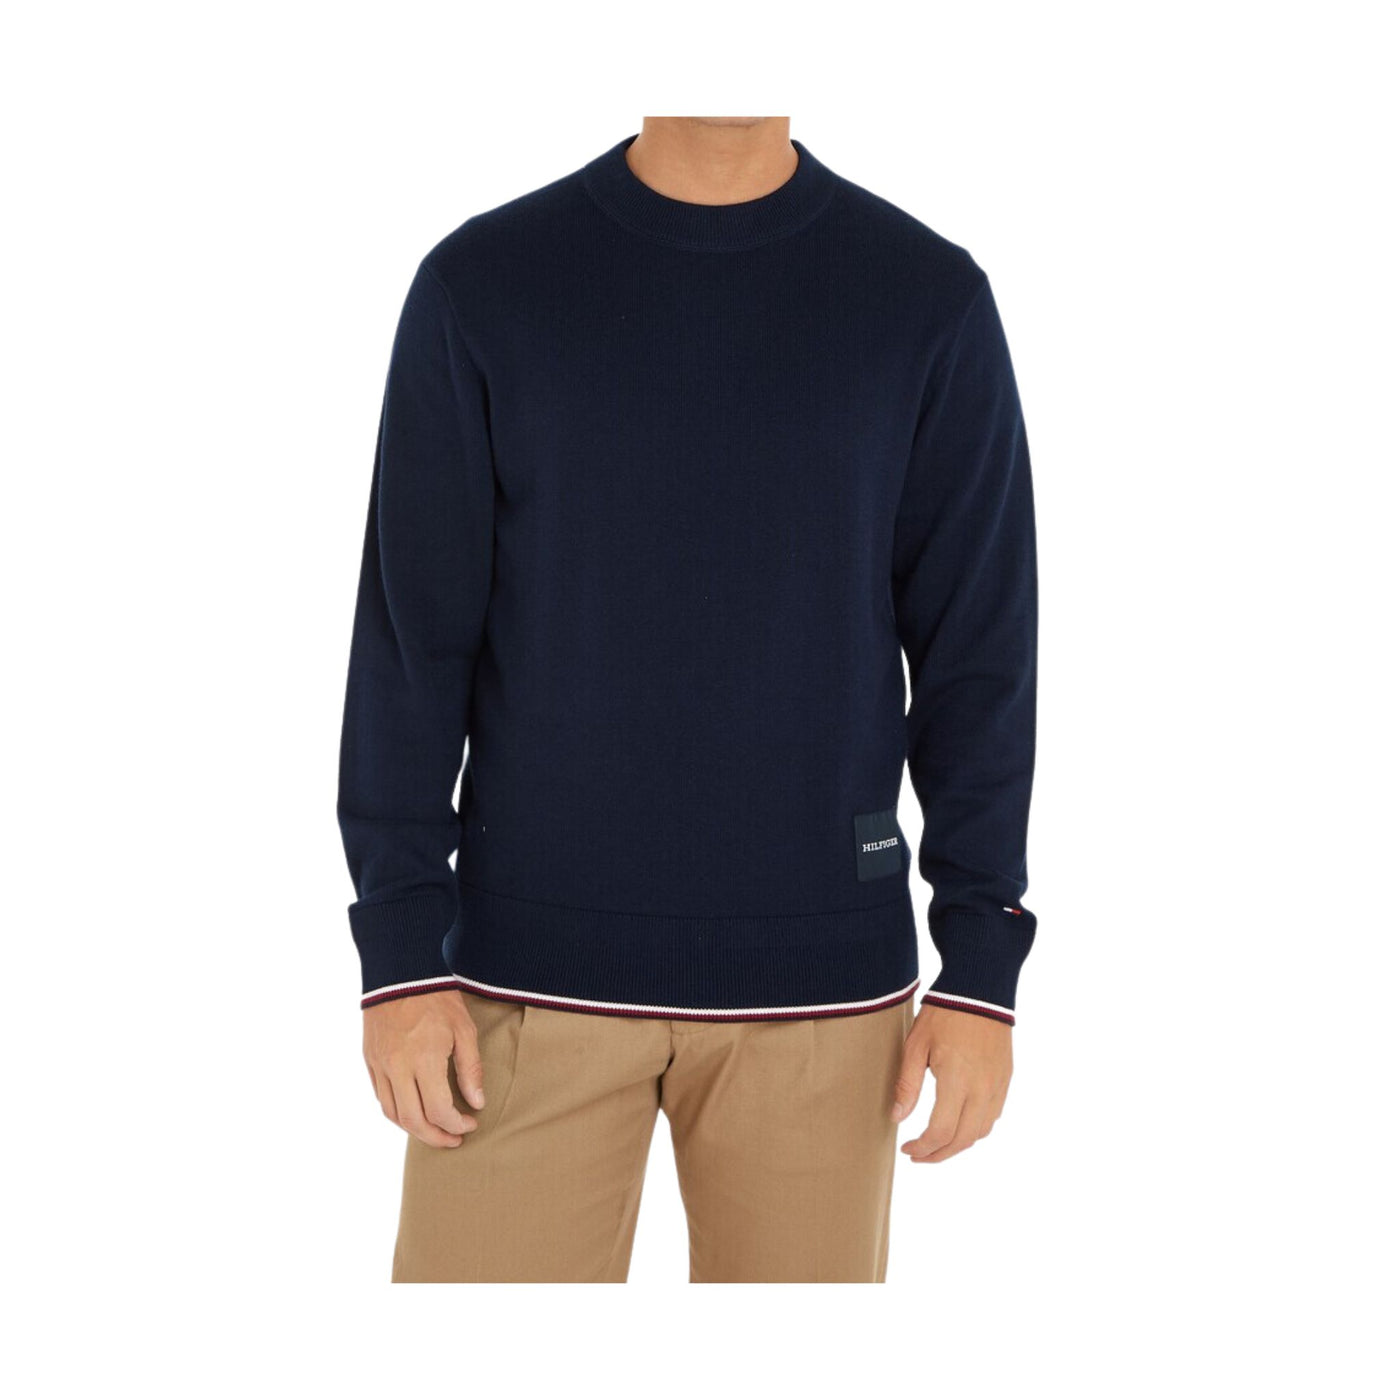 Men's sweater with logo patch